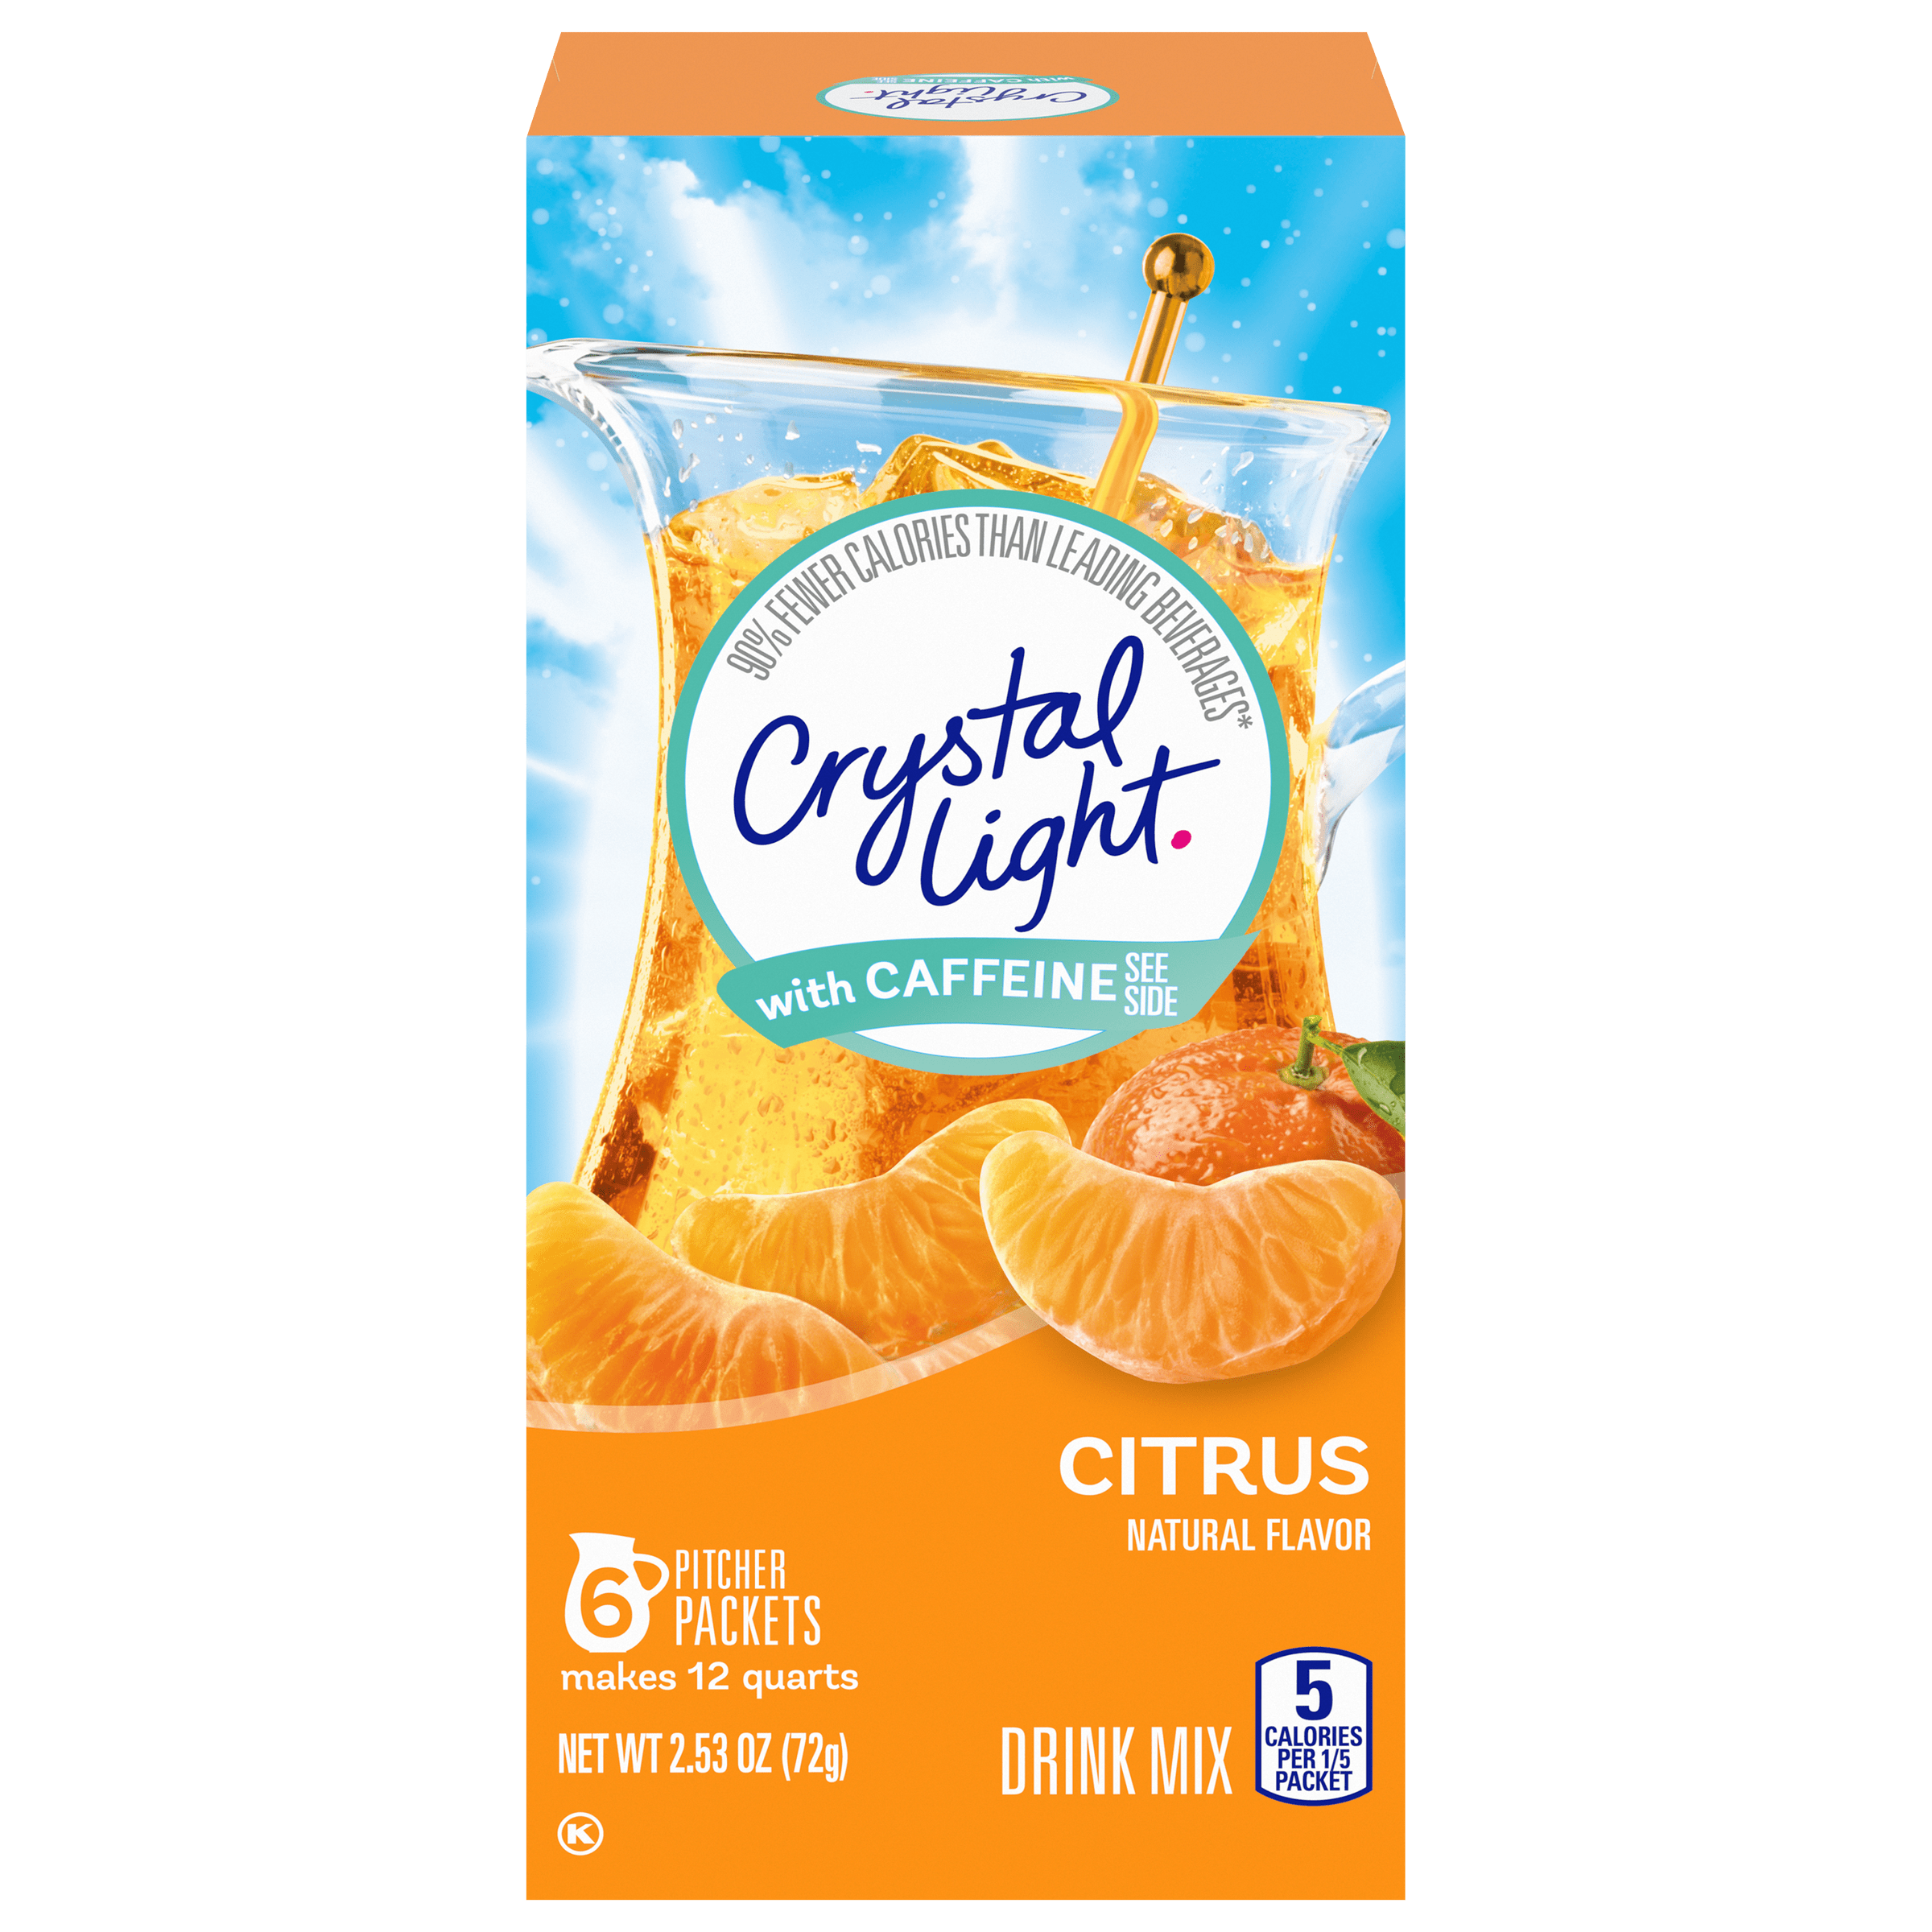 Citrus Naturally Flavored Powdered Drink Mix with Caffeine